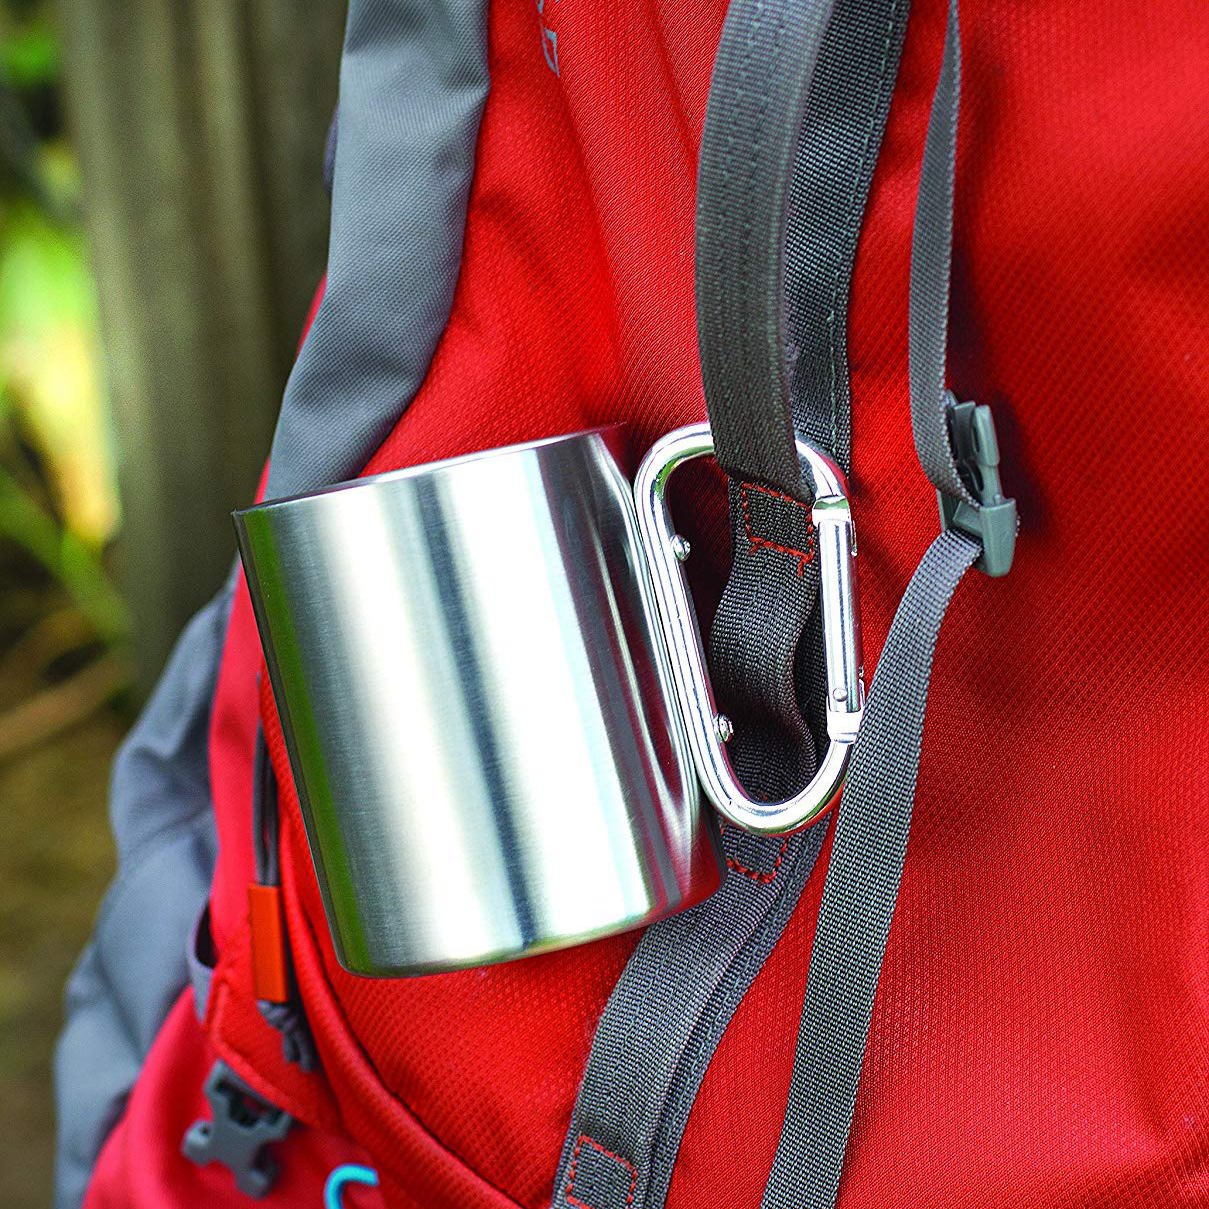 nCamp - Insulated Mug with Carabiner Handle, Stainless Steel Mug, Compact  Camping Cup, 304 Stainless…See more nCamp - Insulated Mug with Carabiner